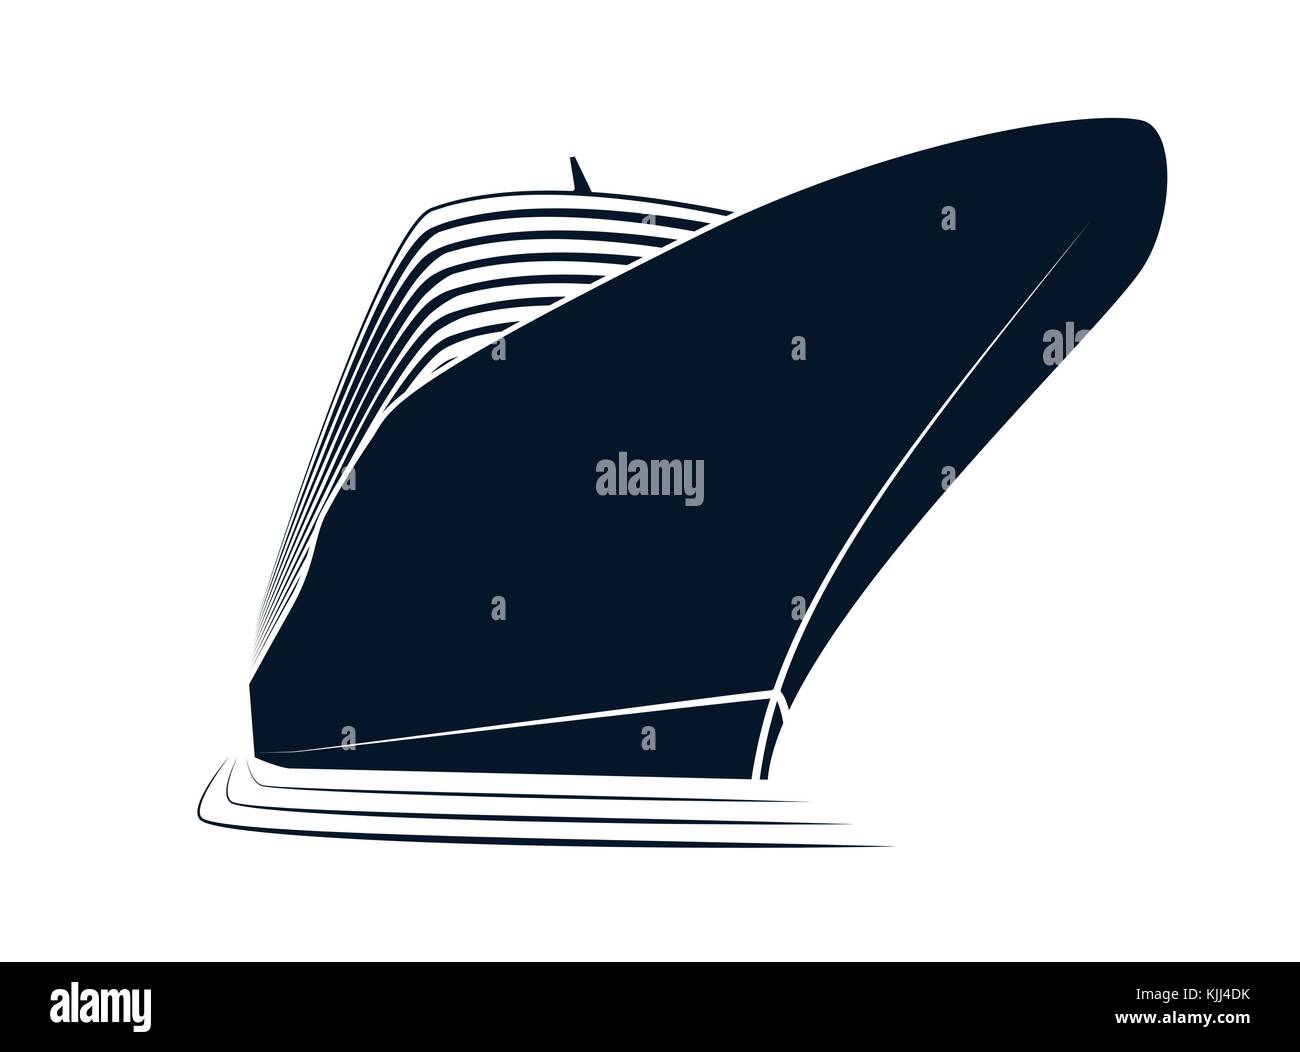 The big nose of a cruise liner. Simple logo ship in the marina. View from the bottom up. Stock Vector